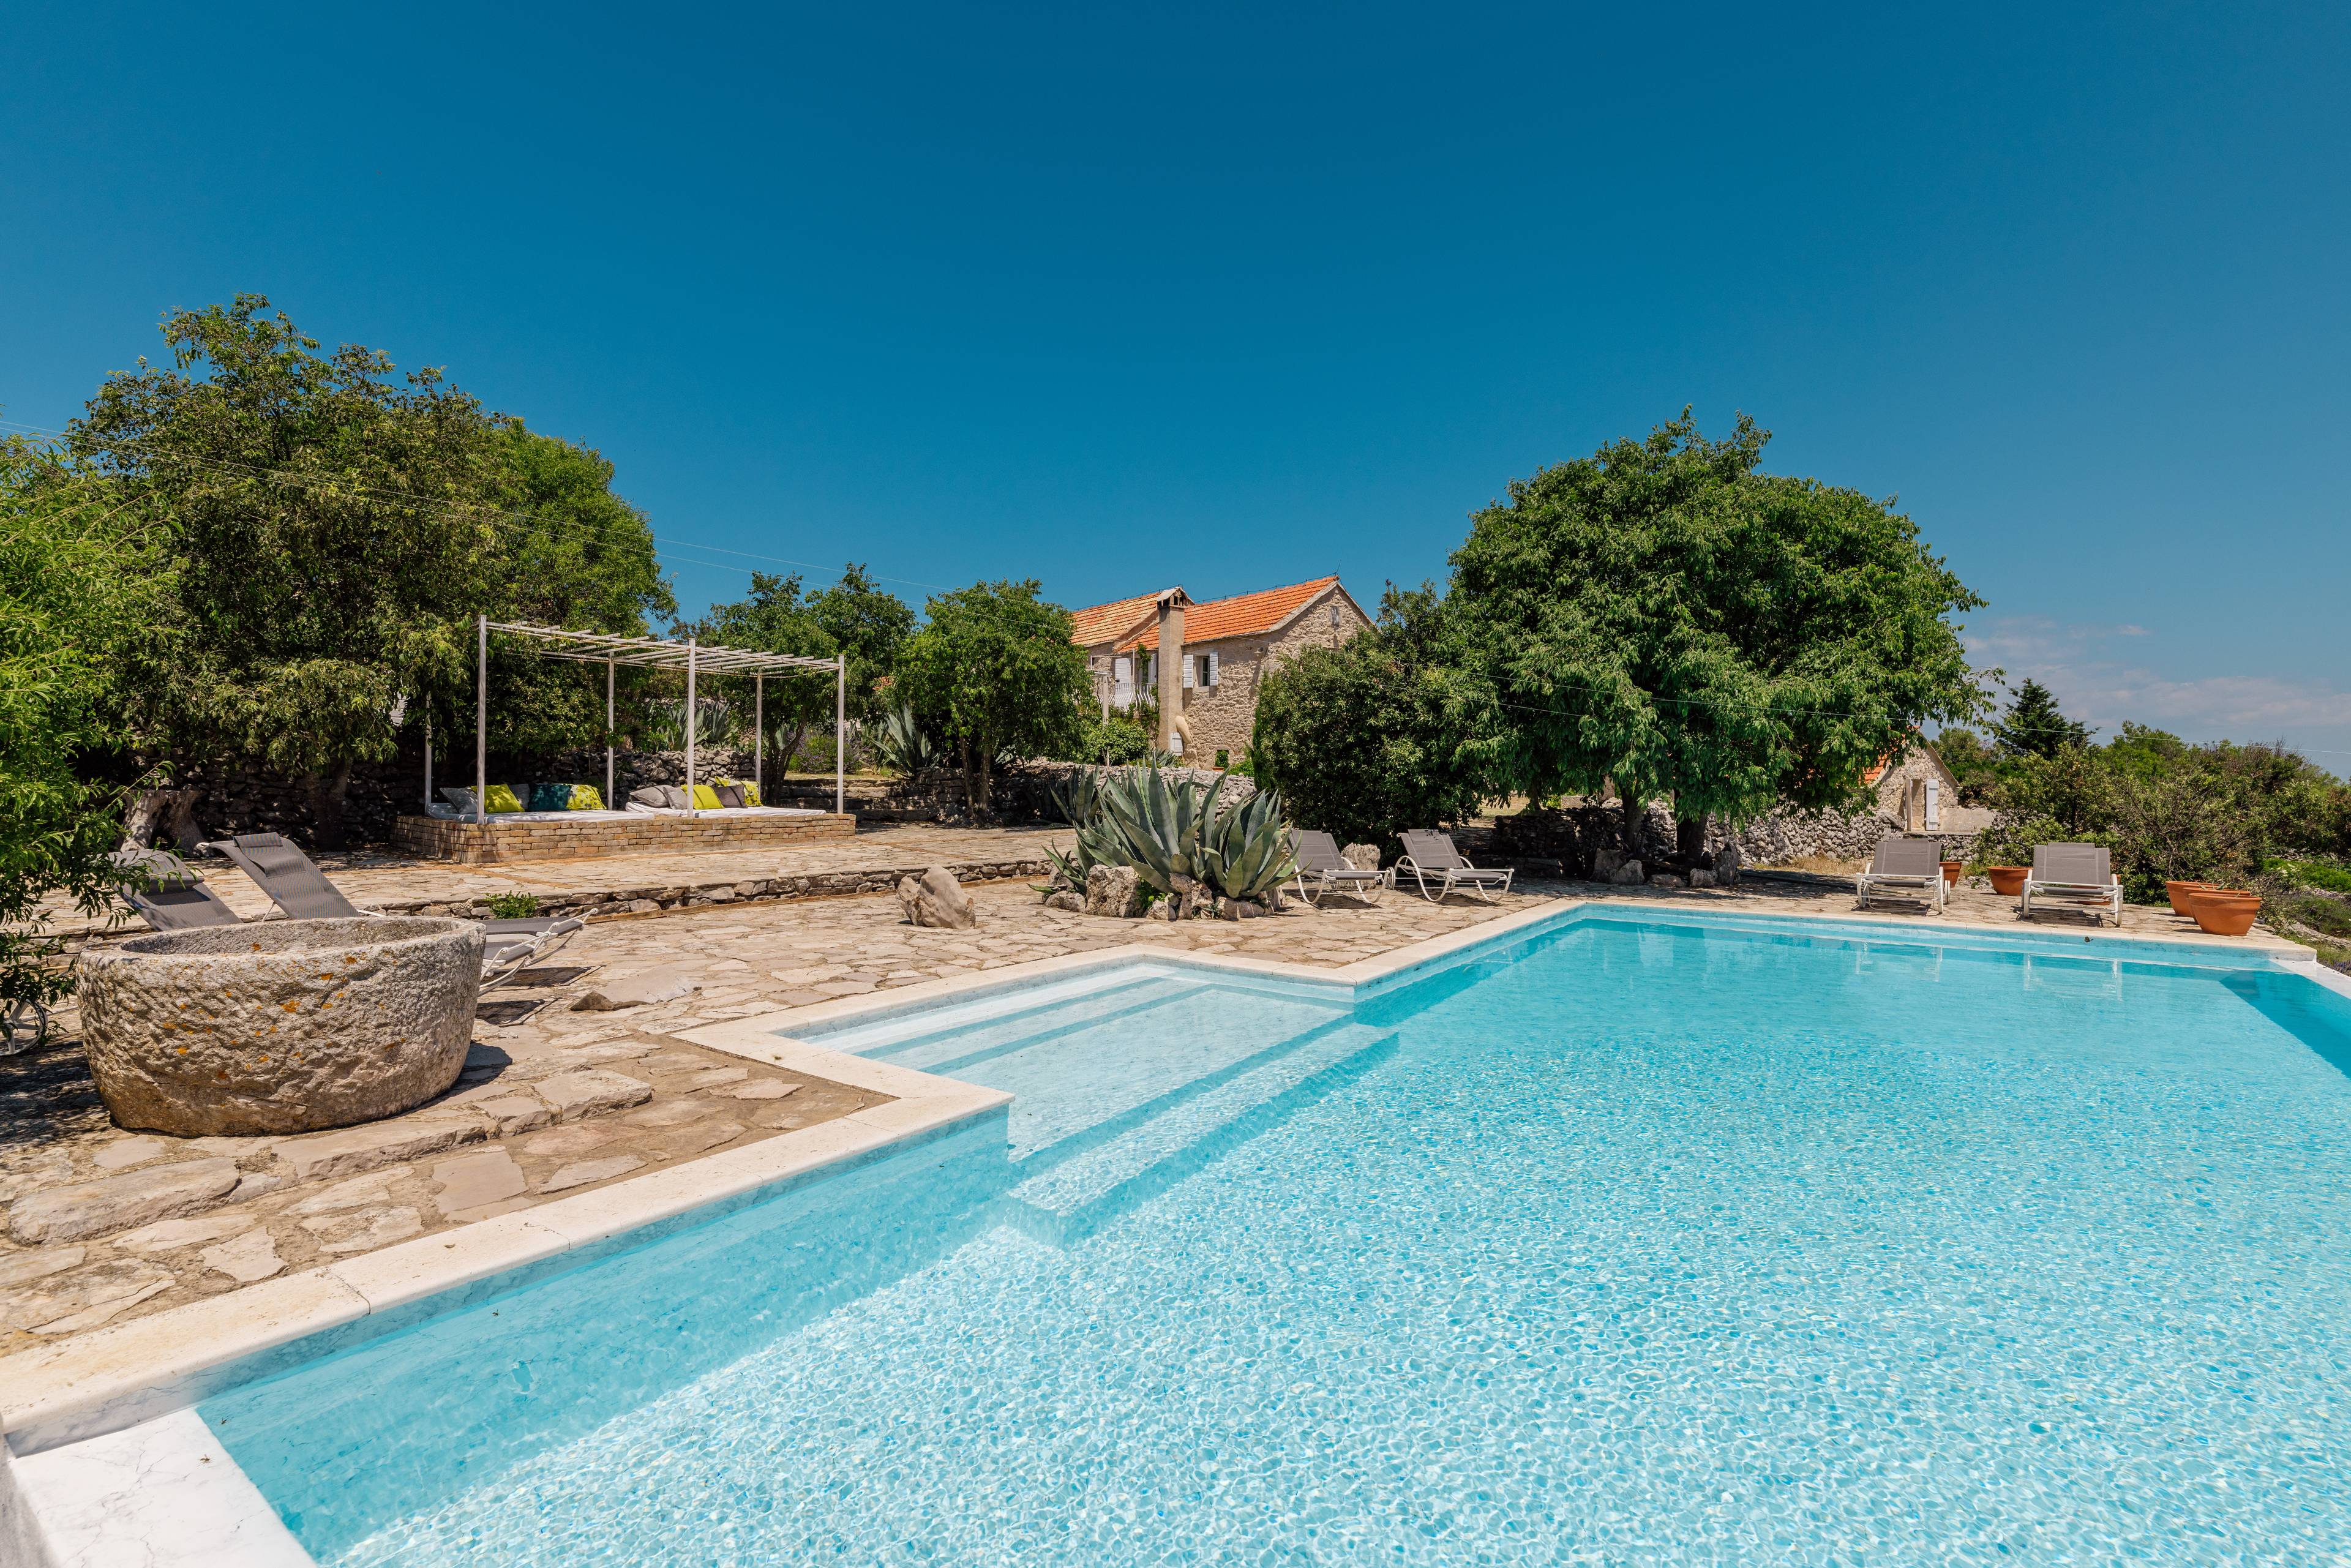 Traditional stone house with swimming pool - Island of Hvar